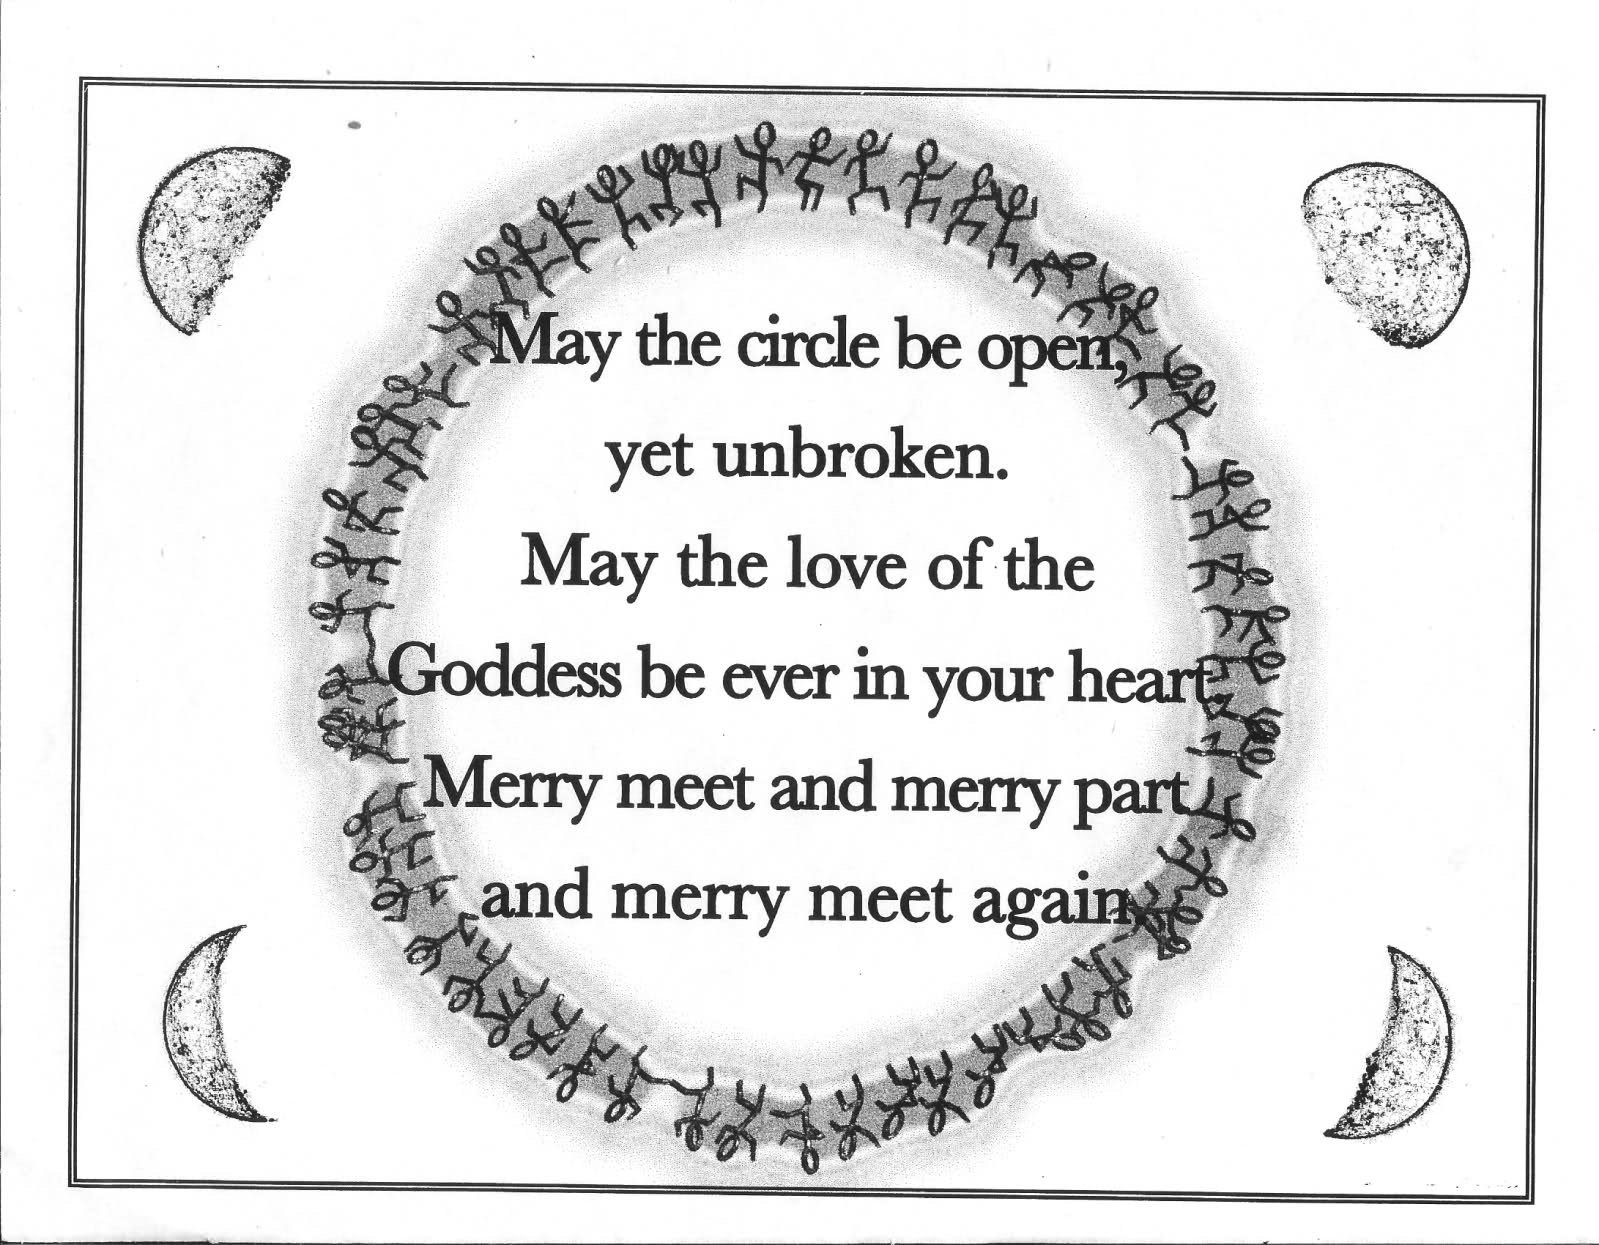 Wiccan, Dark, Best, Witch, Religion,wicca, Hd Wallpaper, - May The Circle Be Open But Unbroken - HD Wallpaper 